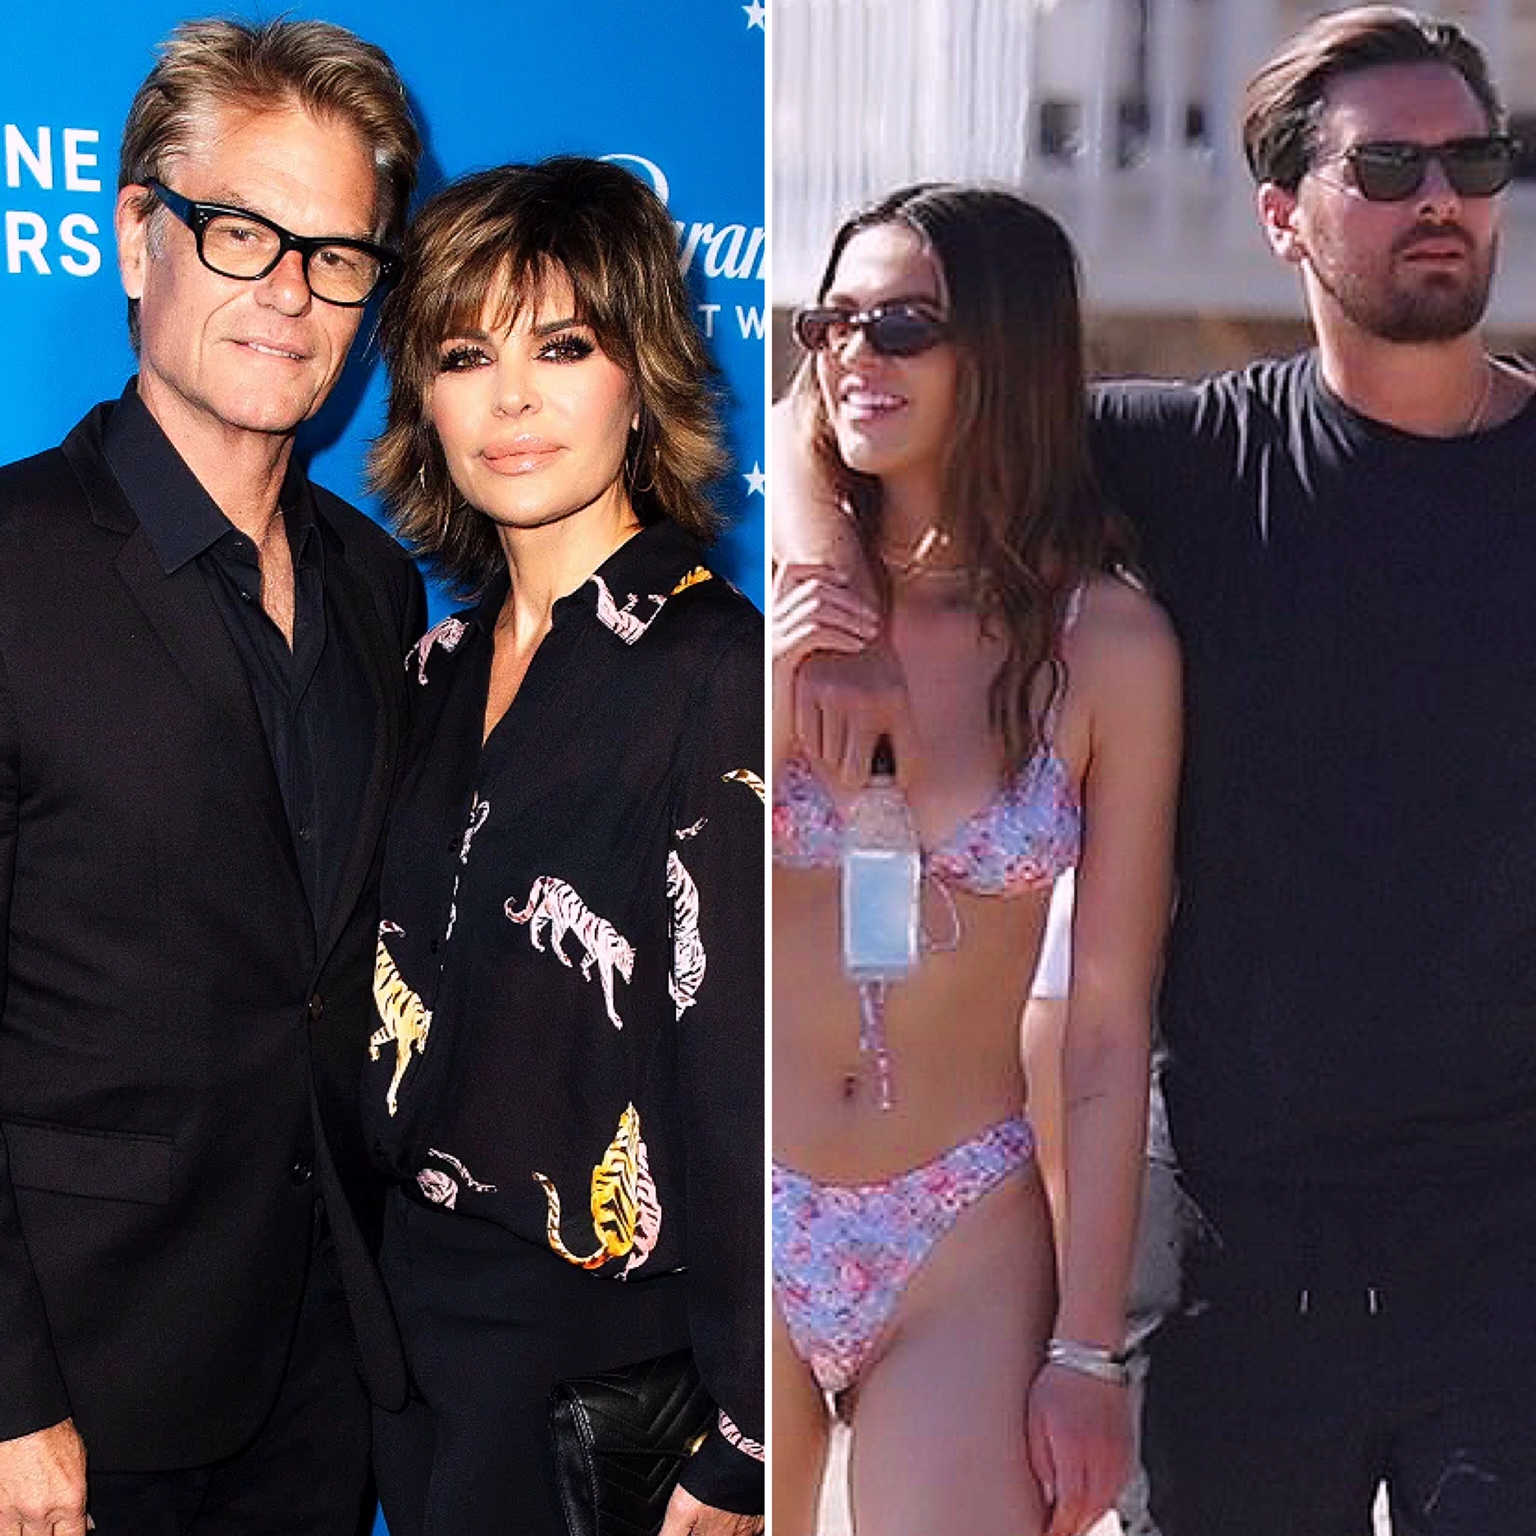 Lisa Rinna And Harry Hamlin Trust Their Daughter Amelia Gray Hamlin To Make Appropriate Decisions When It Comes To Her Spending Time With Scott Disick If She S Happy They Re Happy Sources Say